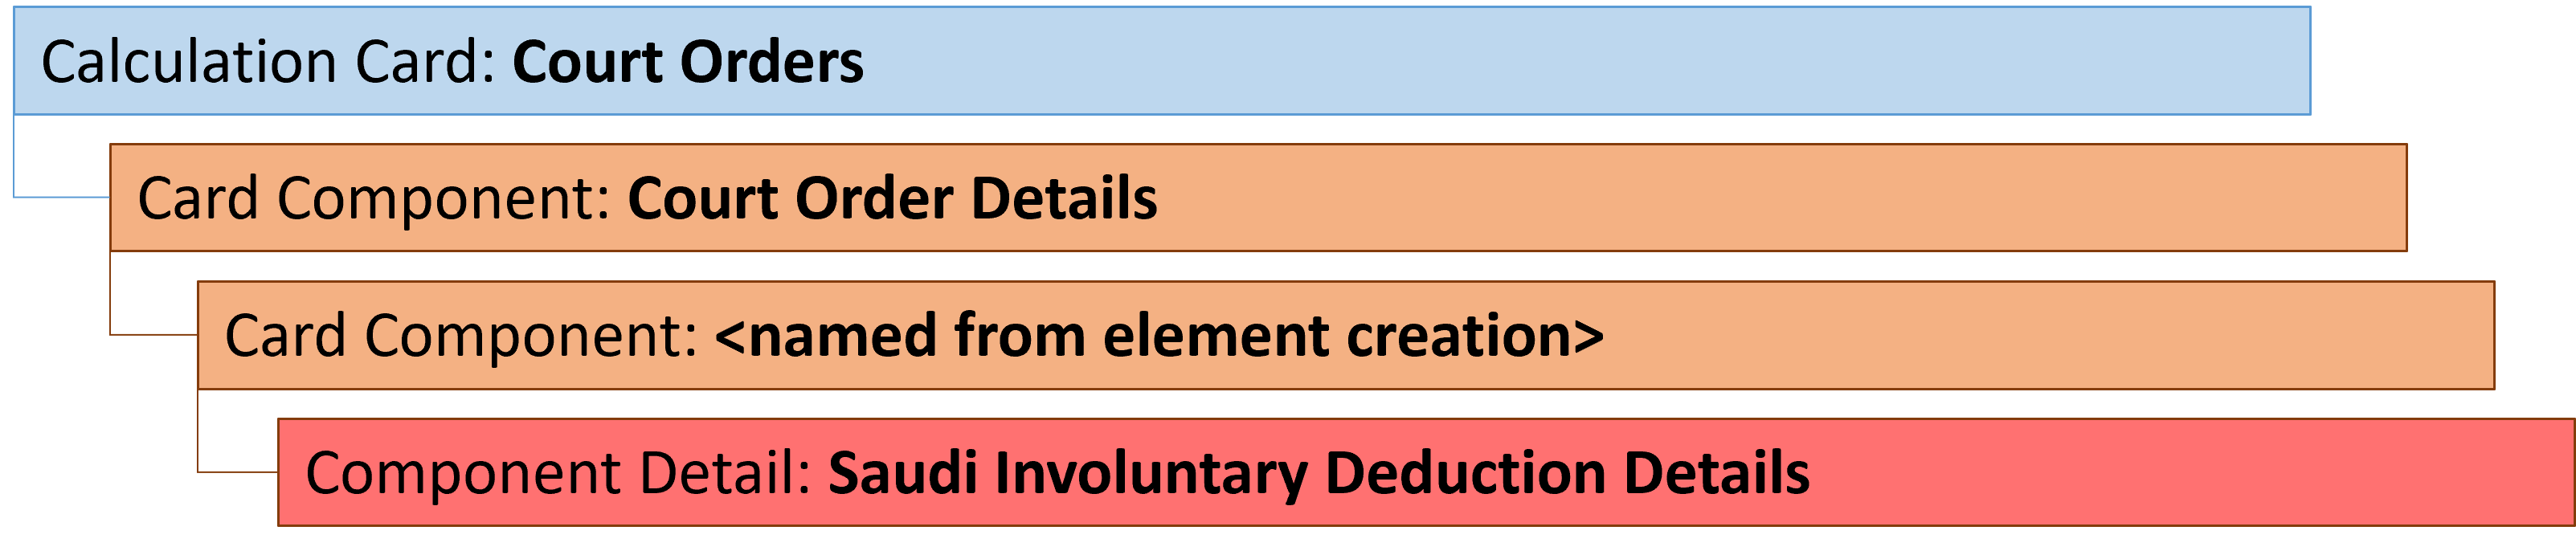 Hierarchy of calculation card components applicable to Court Orders